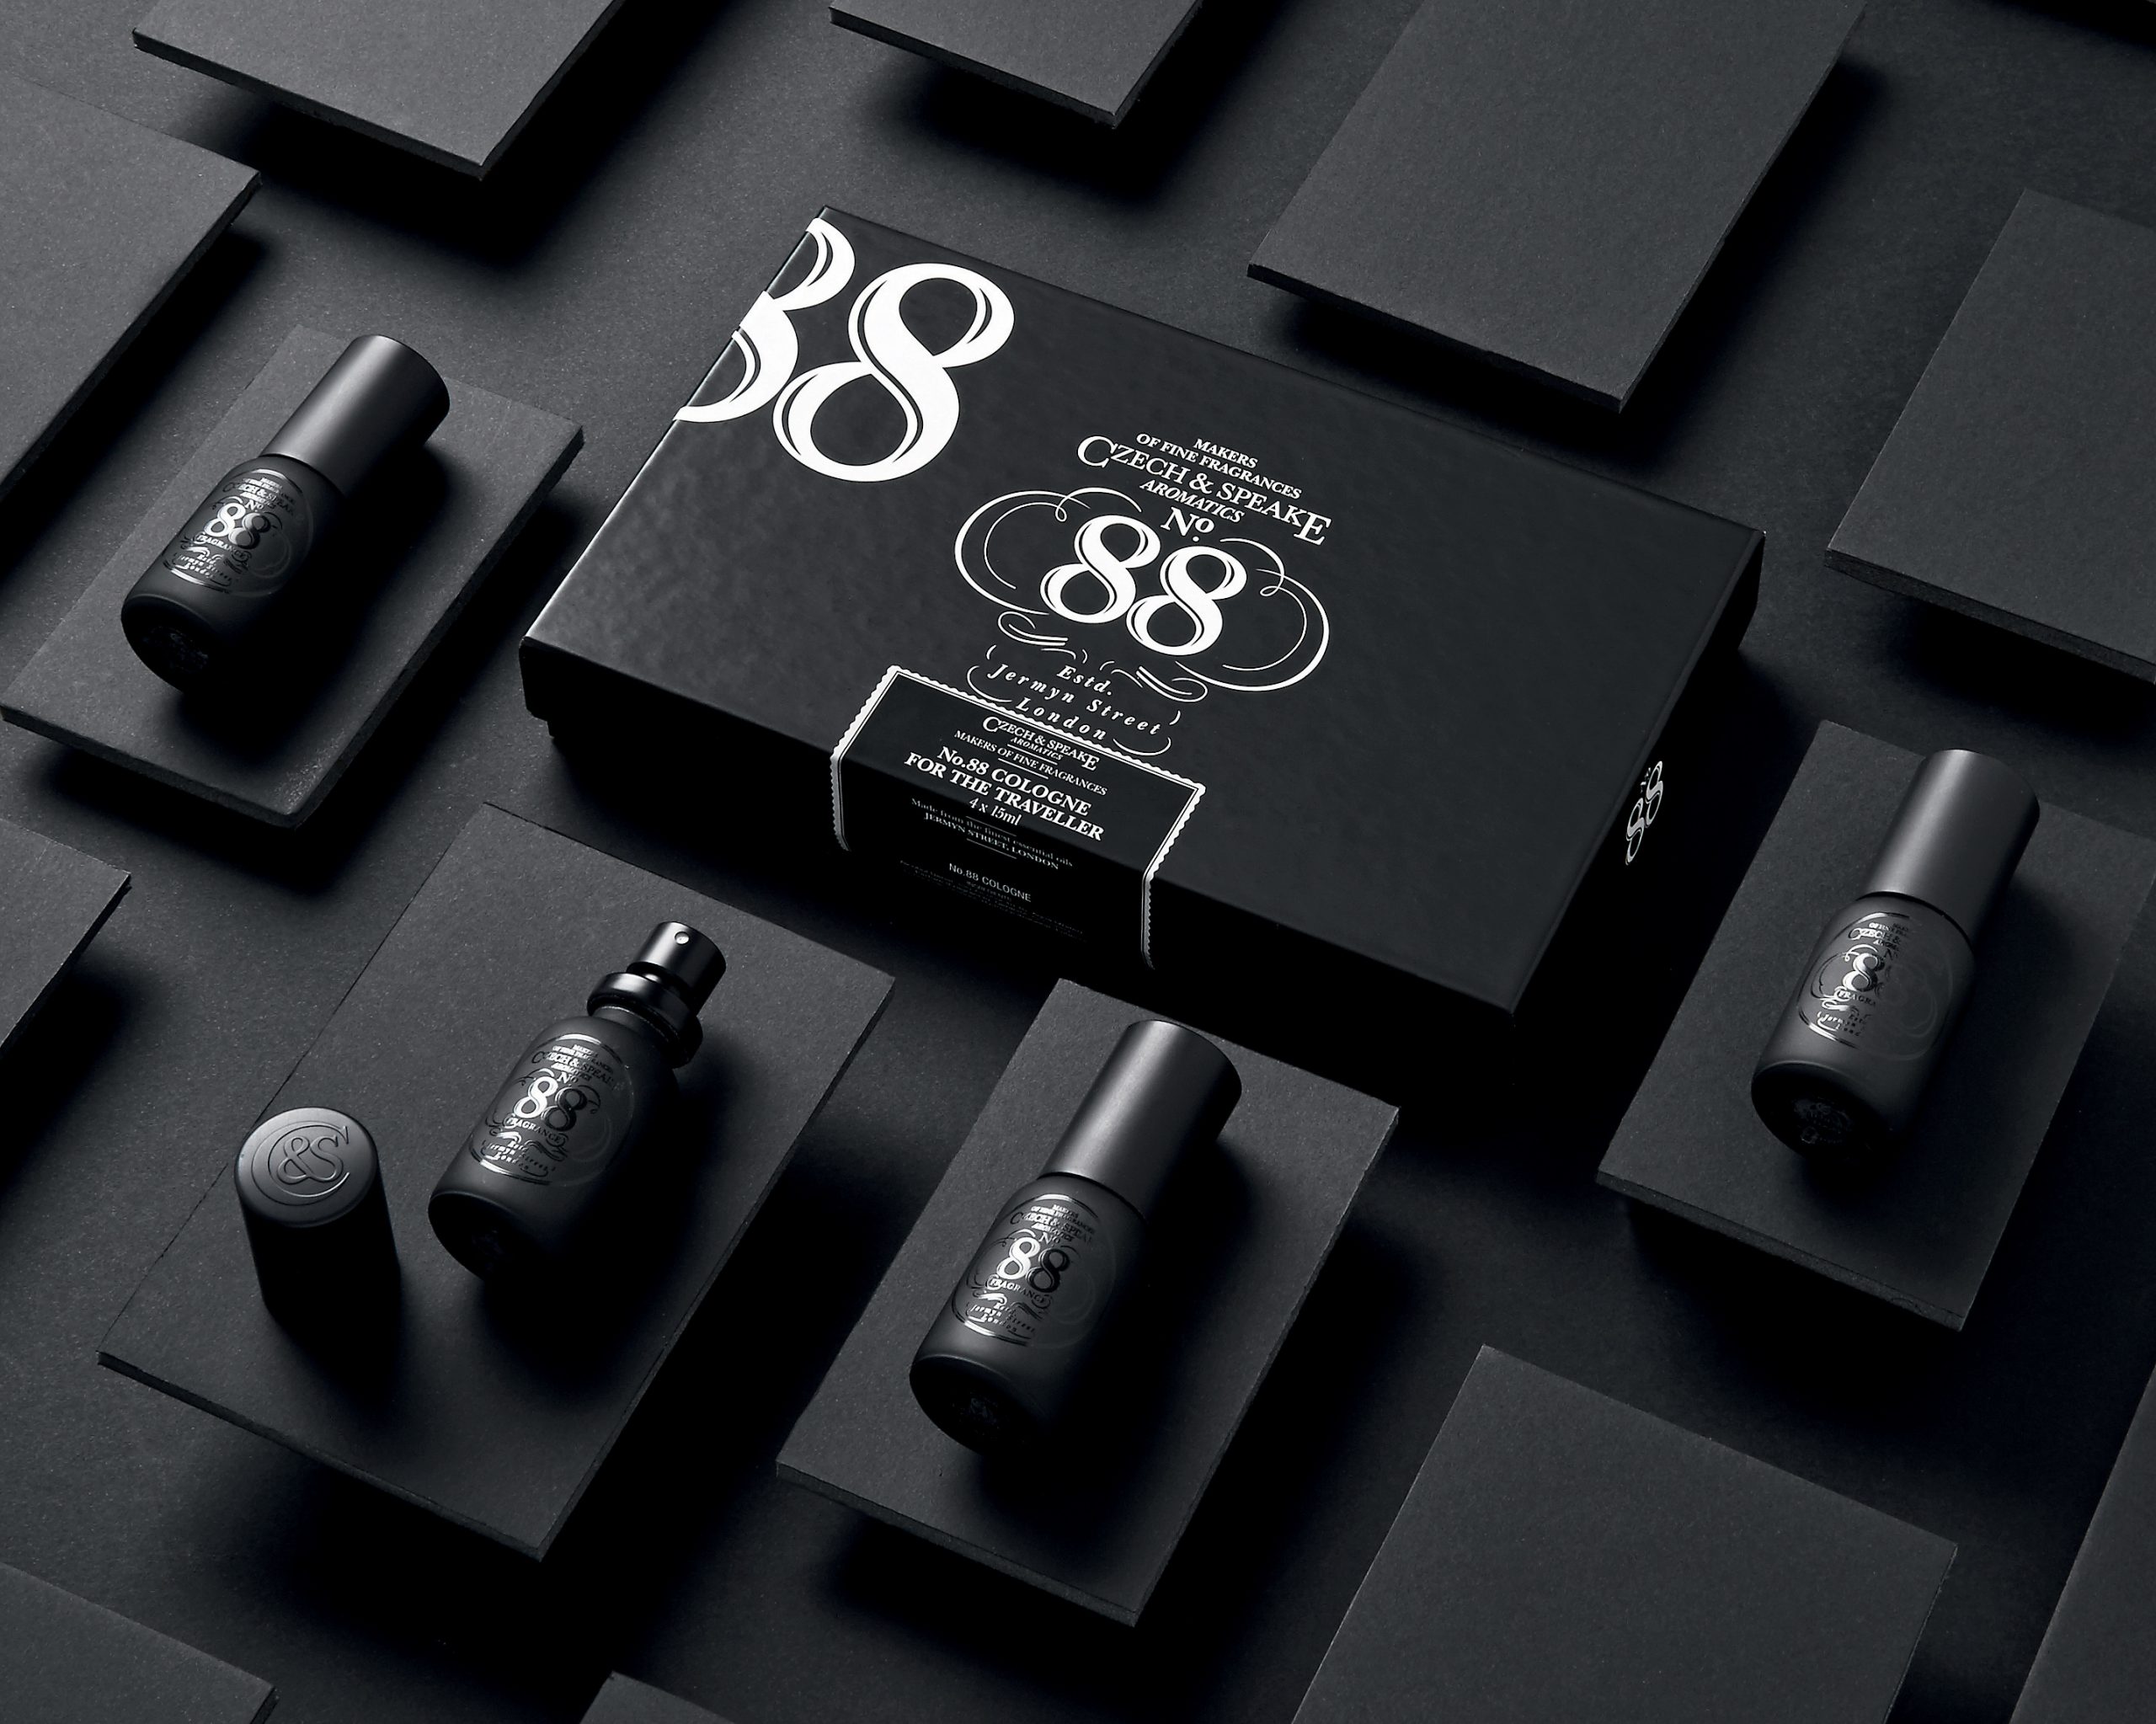 Black blocks, with No.88 travel size colognes laid out.